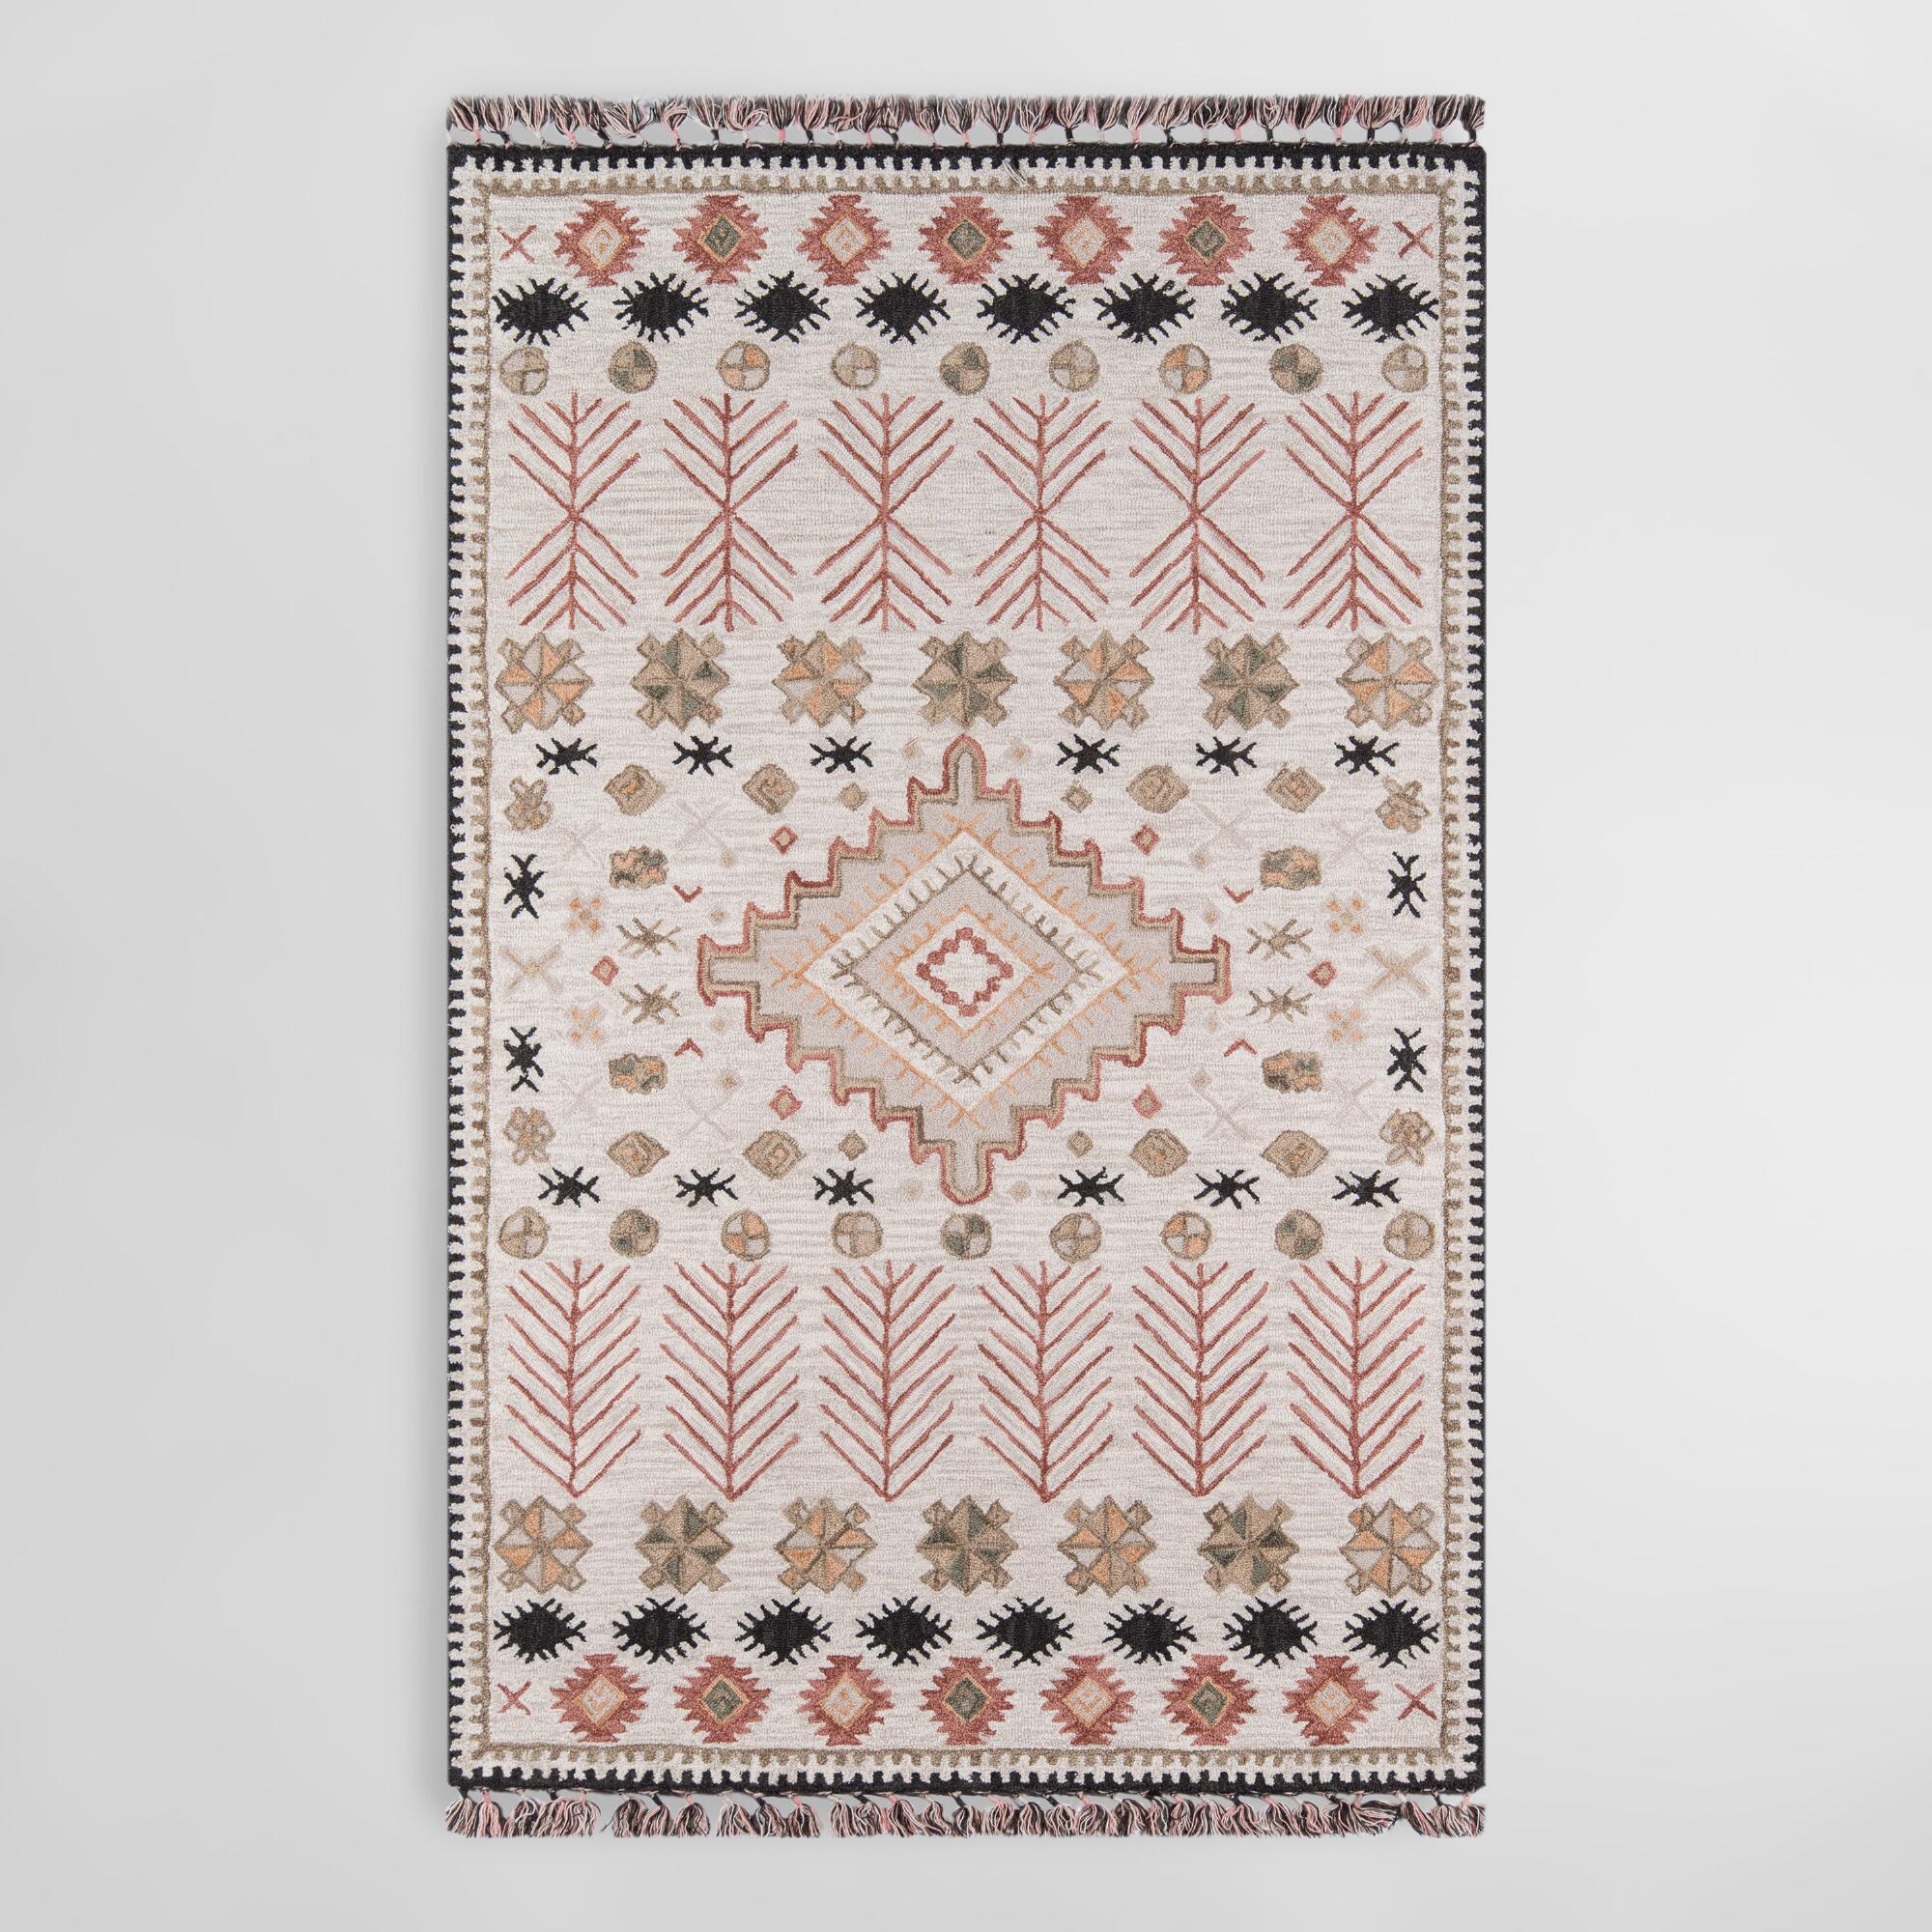 Ivory and Spice Tufted Wool Aelin Area Rug: Pink - 5' x 8' by World Market